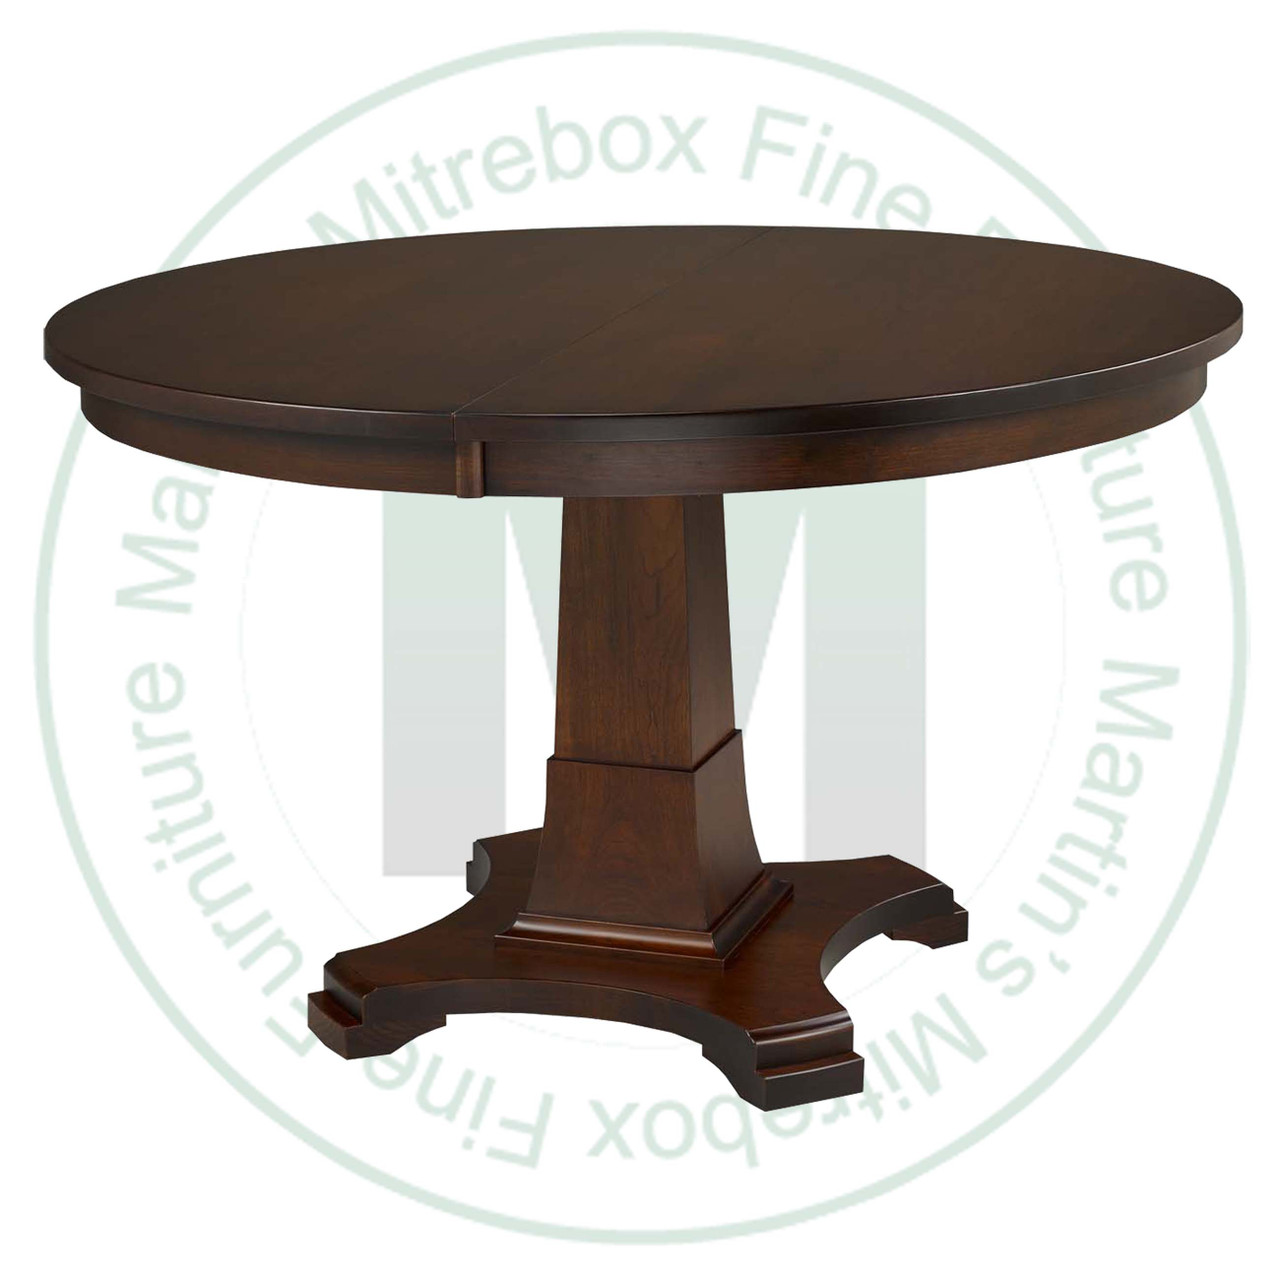 Wormy Maple Abbey Single Pedestal Table 36''D x 48''W x 30''H With 1 - 12'' Leaf. Table Has 1'' Thick Top